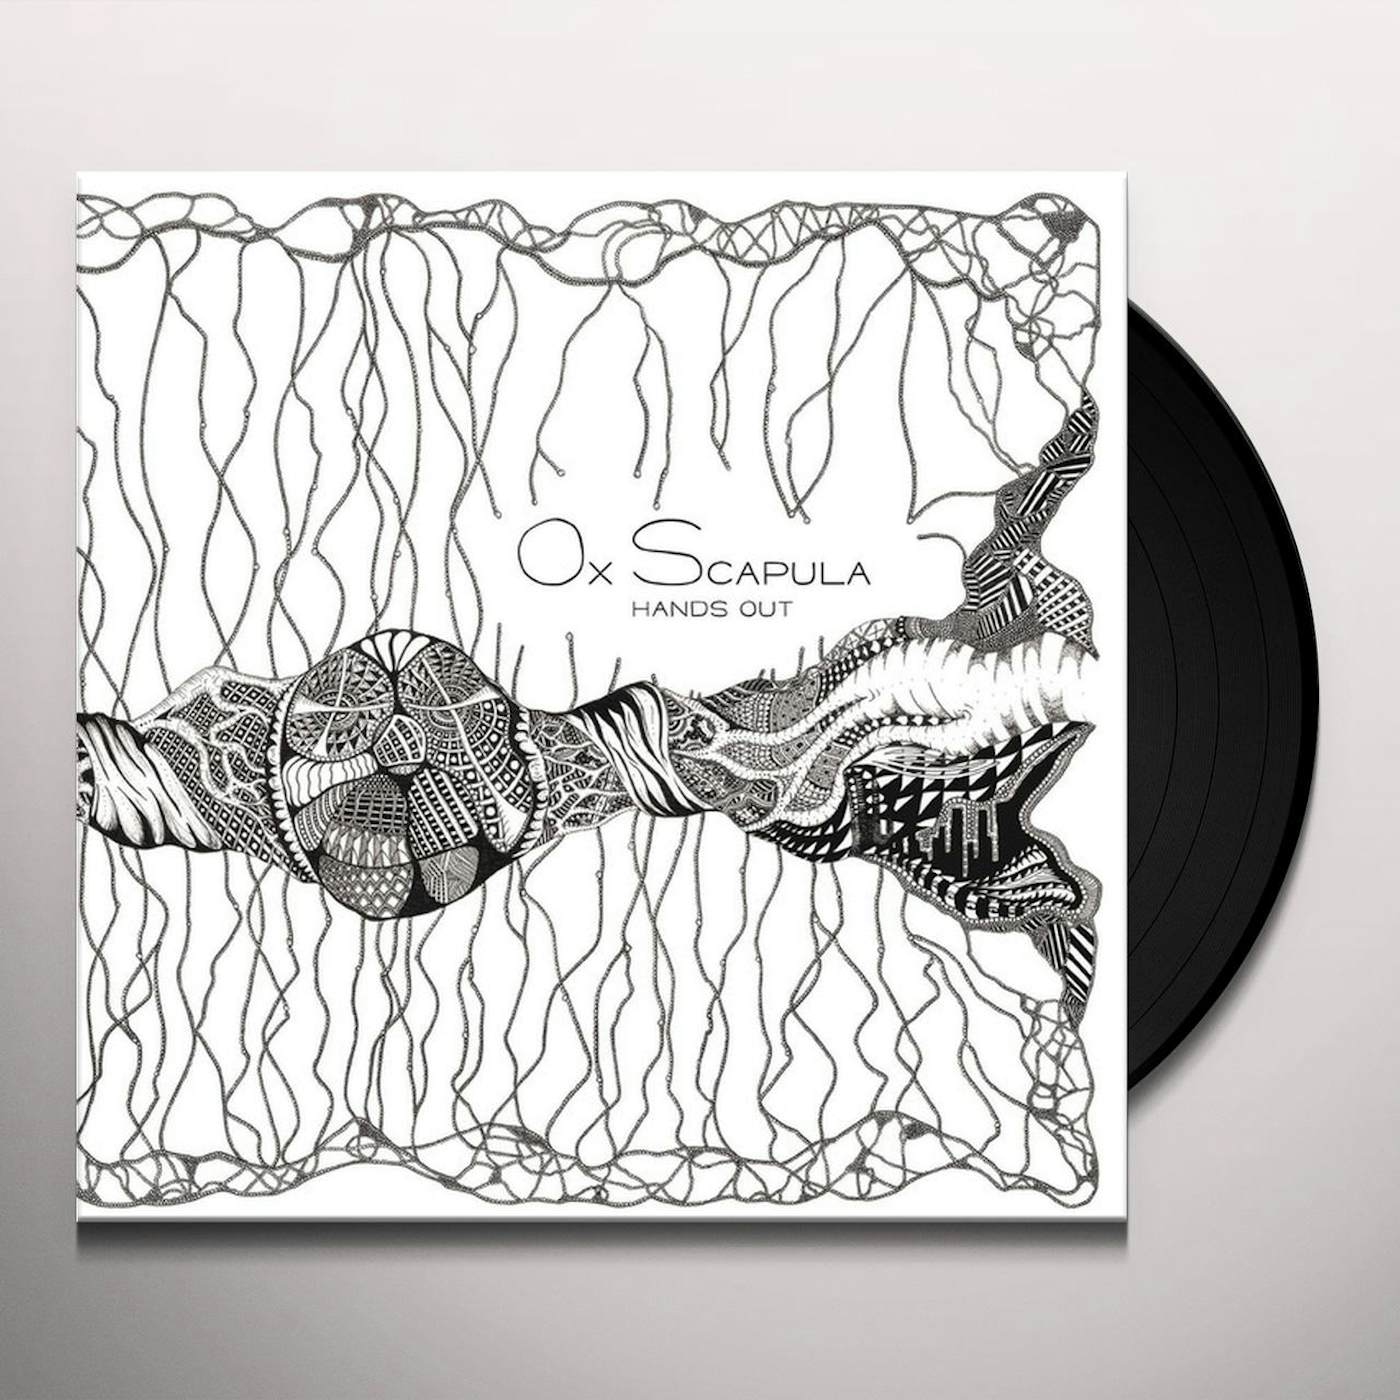 Ox Scapula Hands Out Vinyl Record